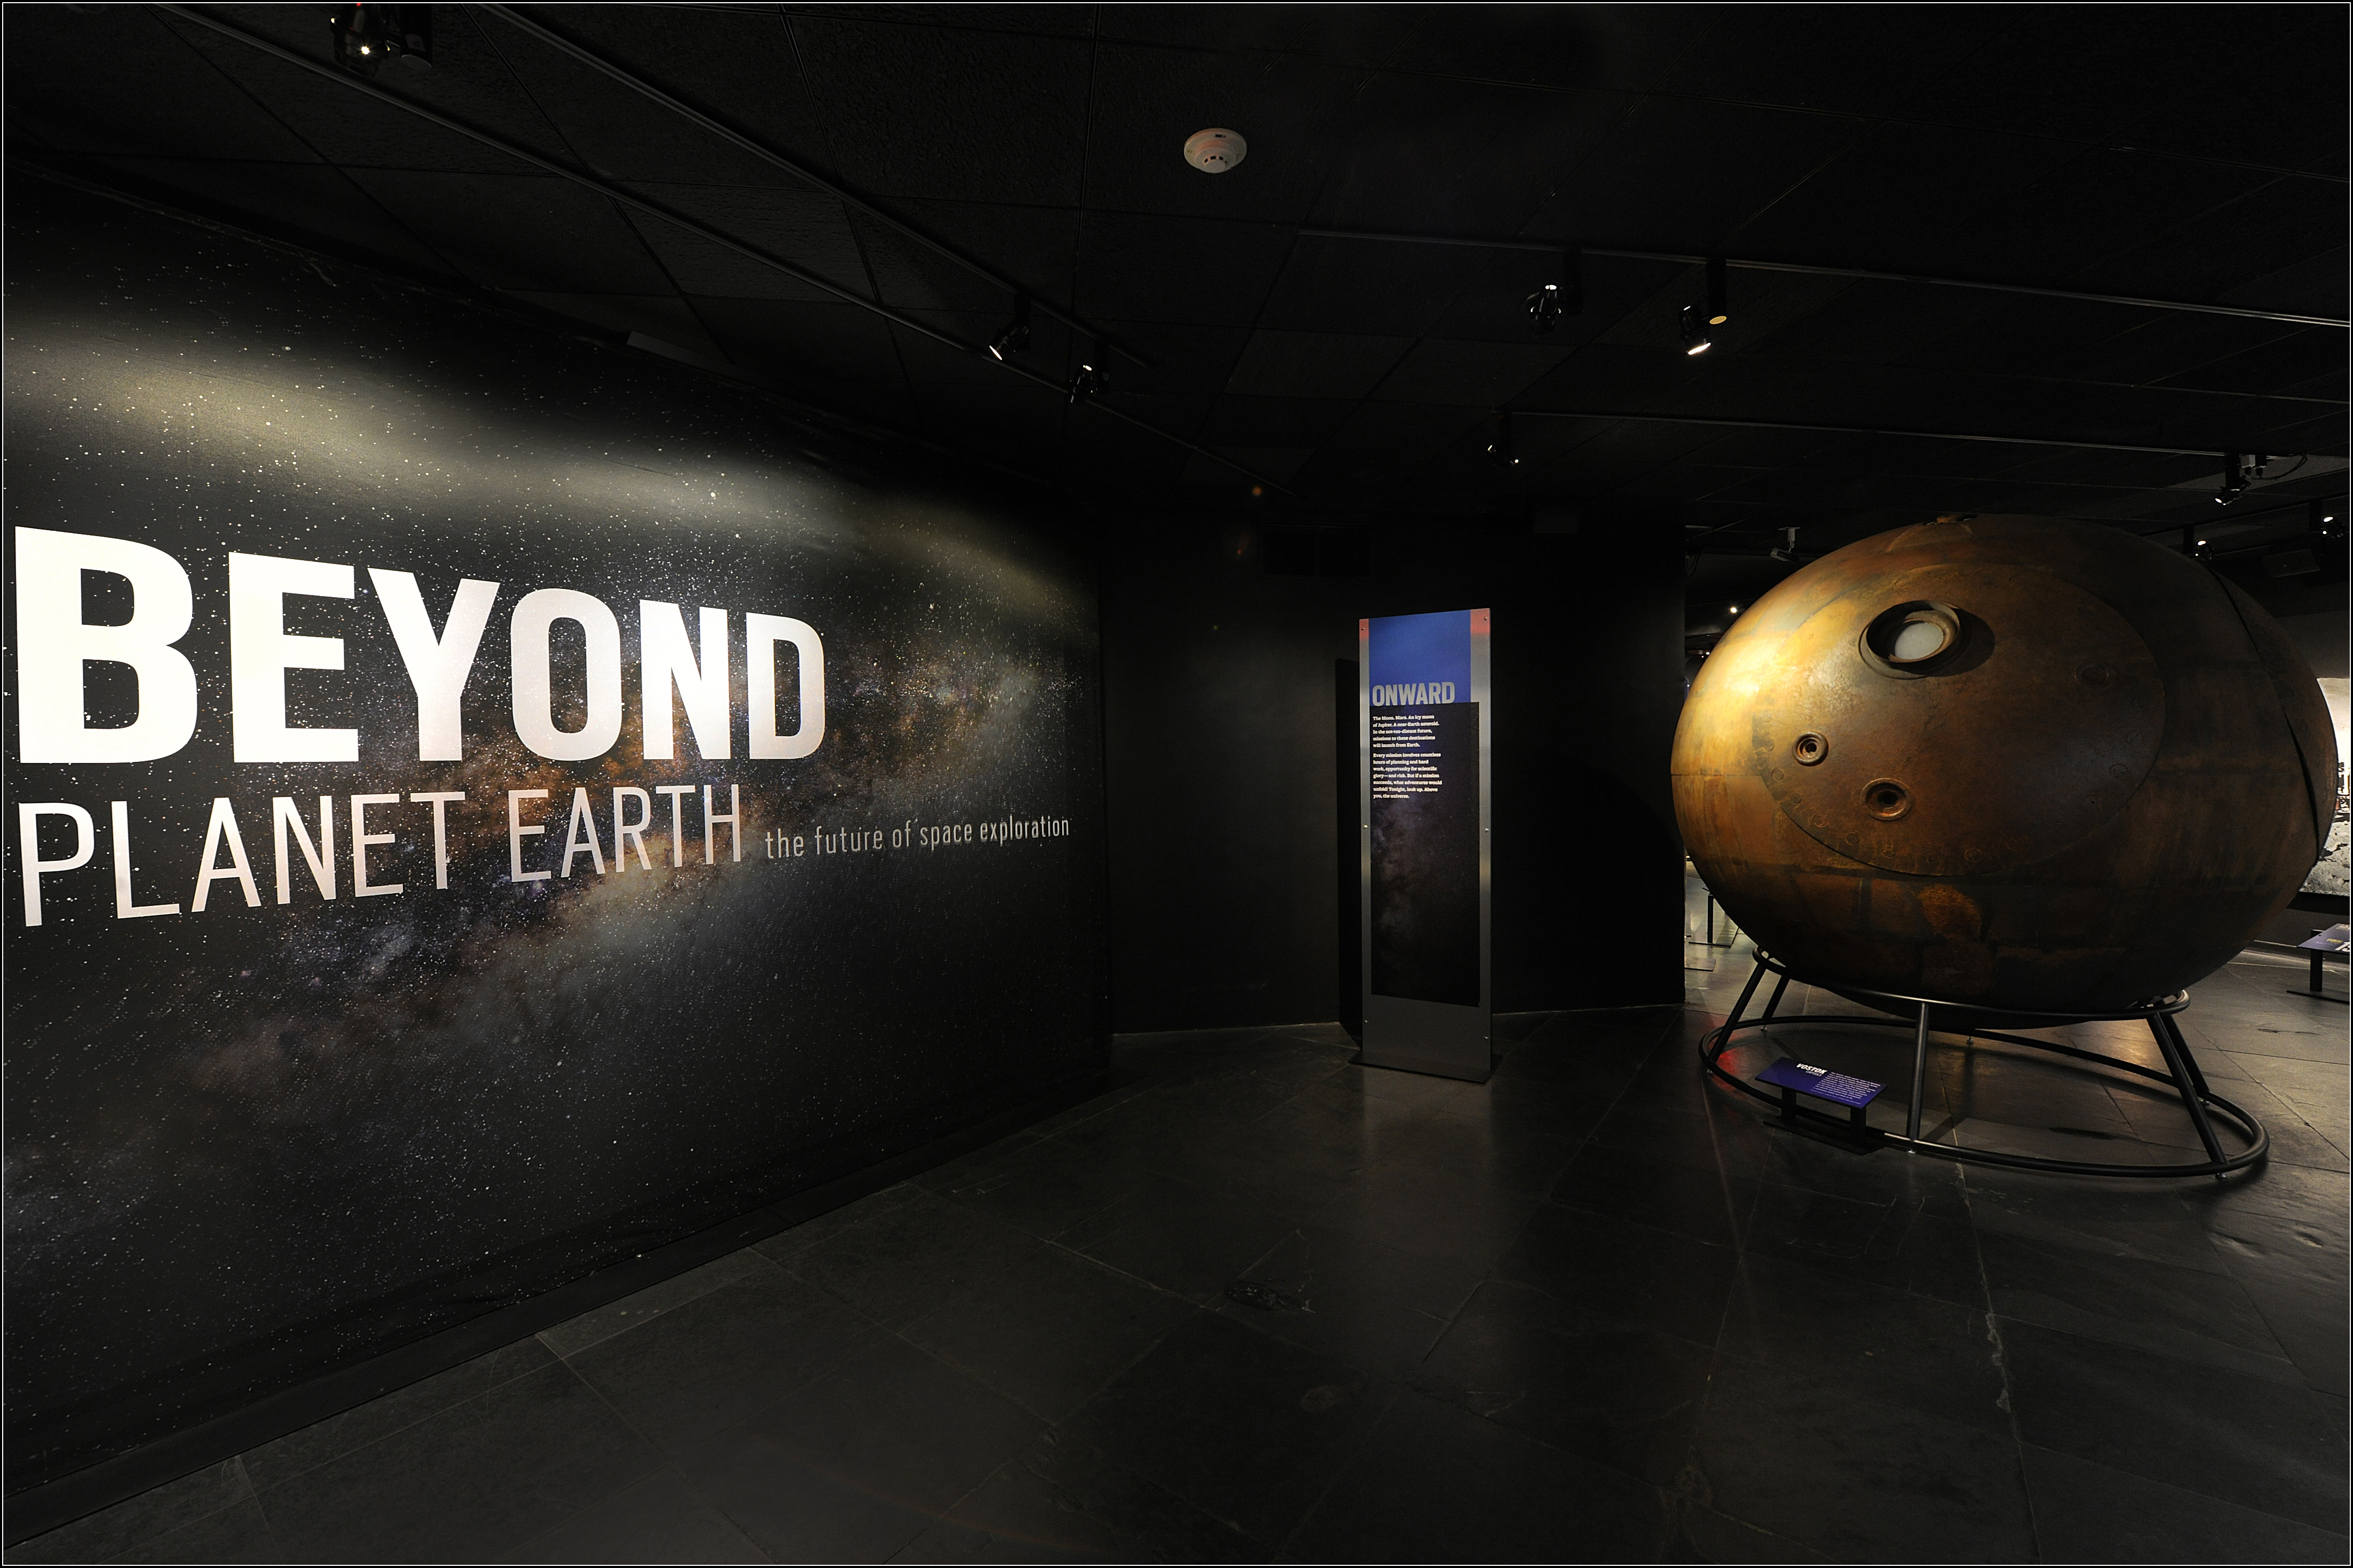 Beyond Planet Earth opens with a retrospective of historic piloted and unpiloted space missions before introducing new ideas and technologies that will prepare us to explore the next frontier.